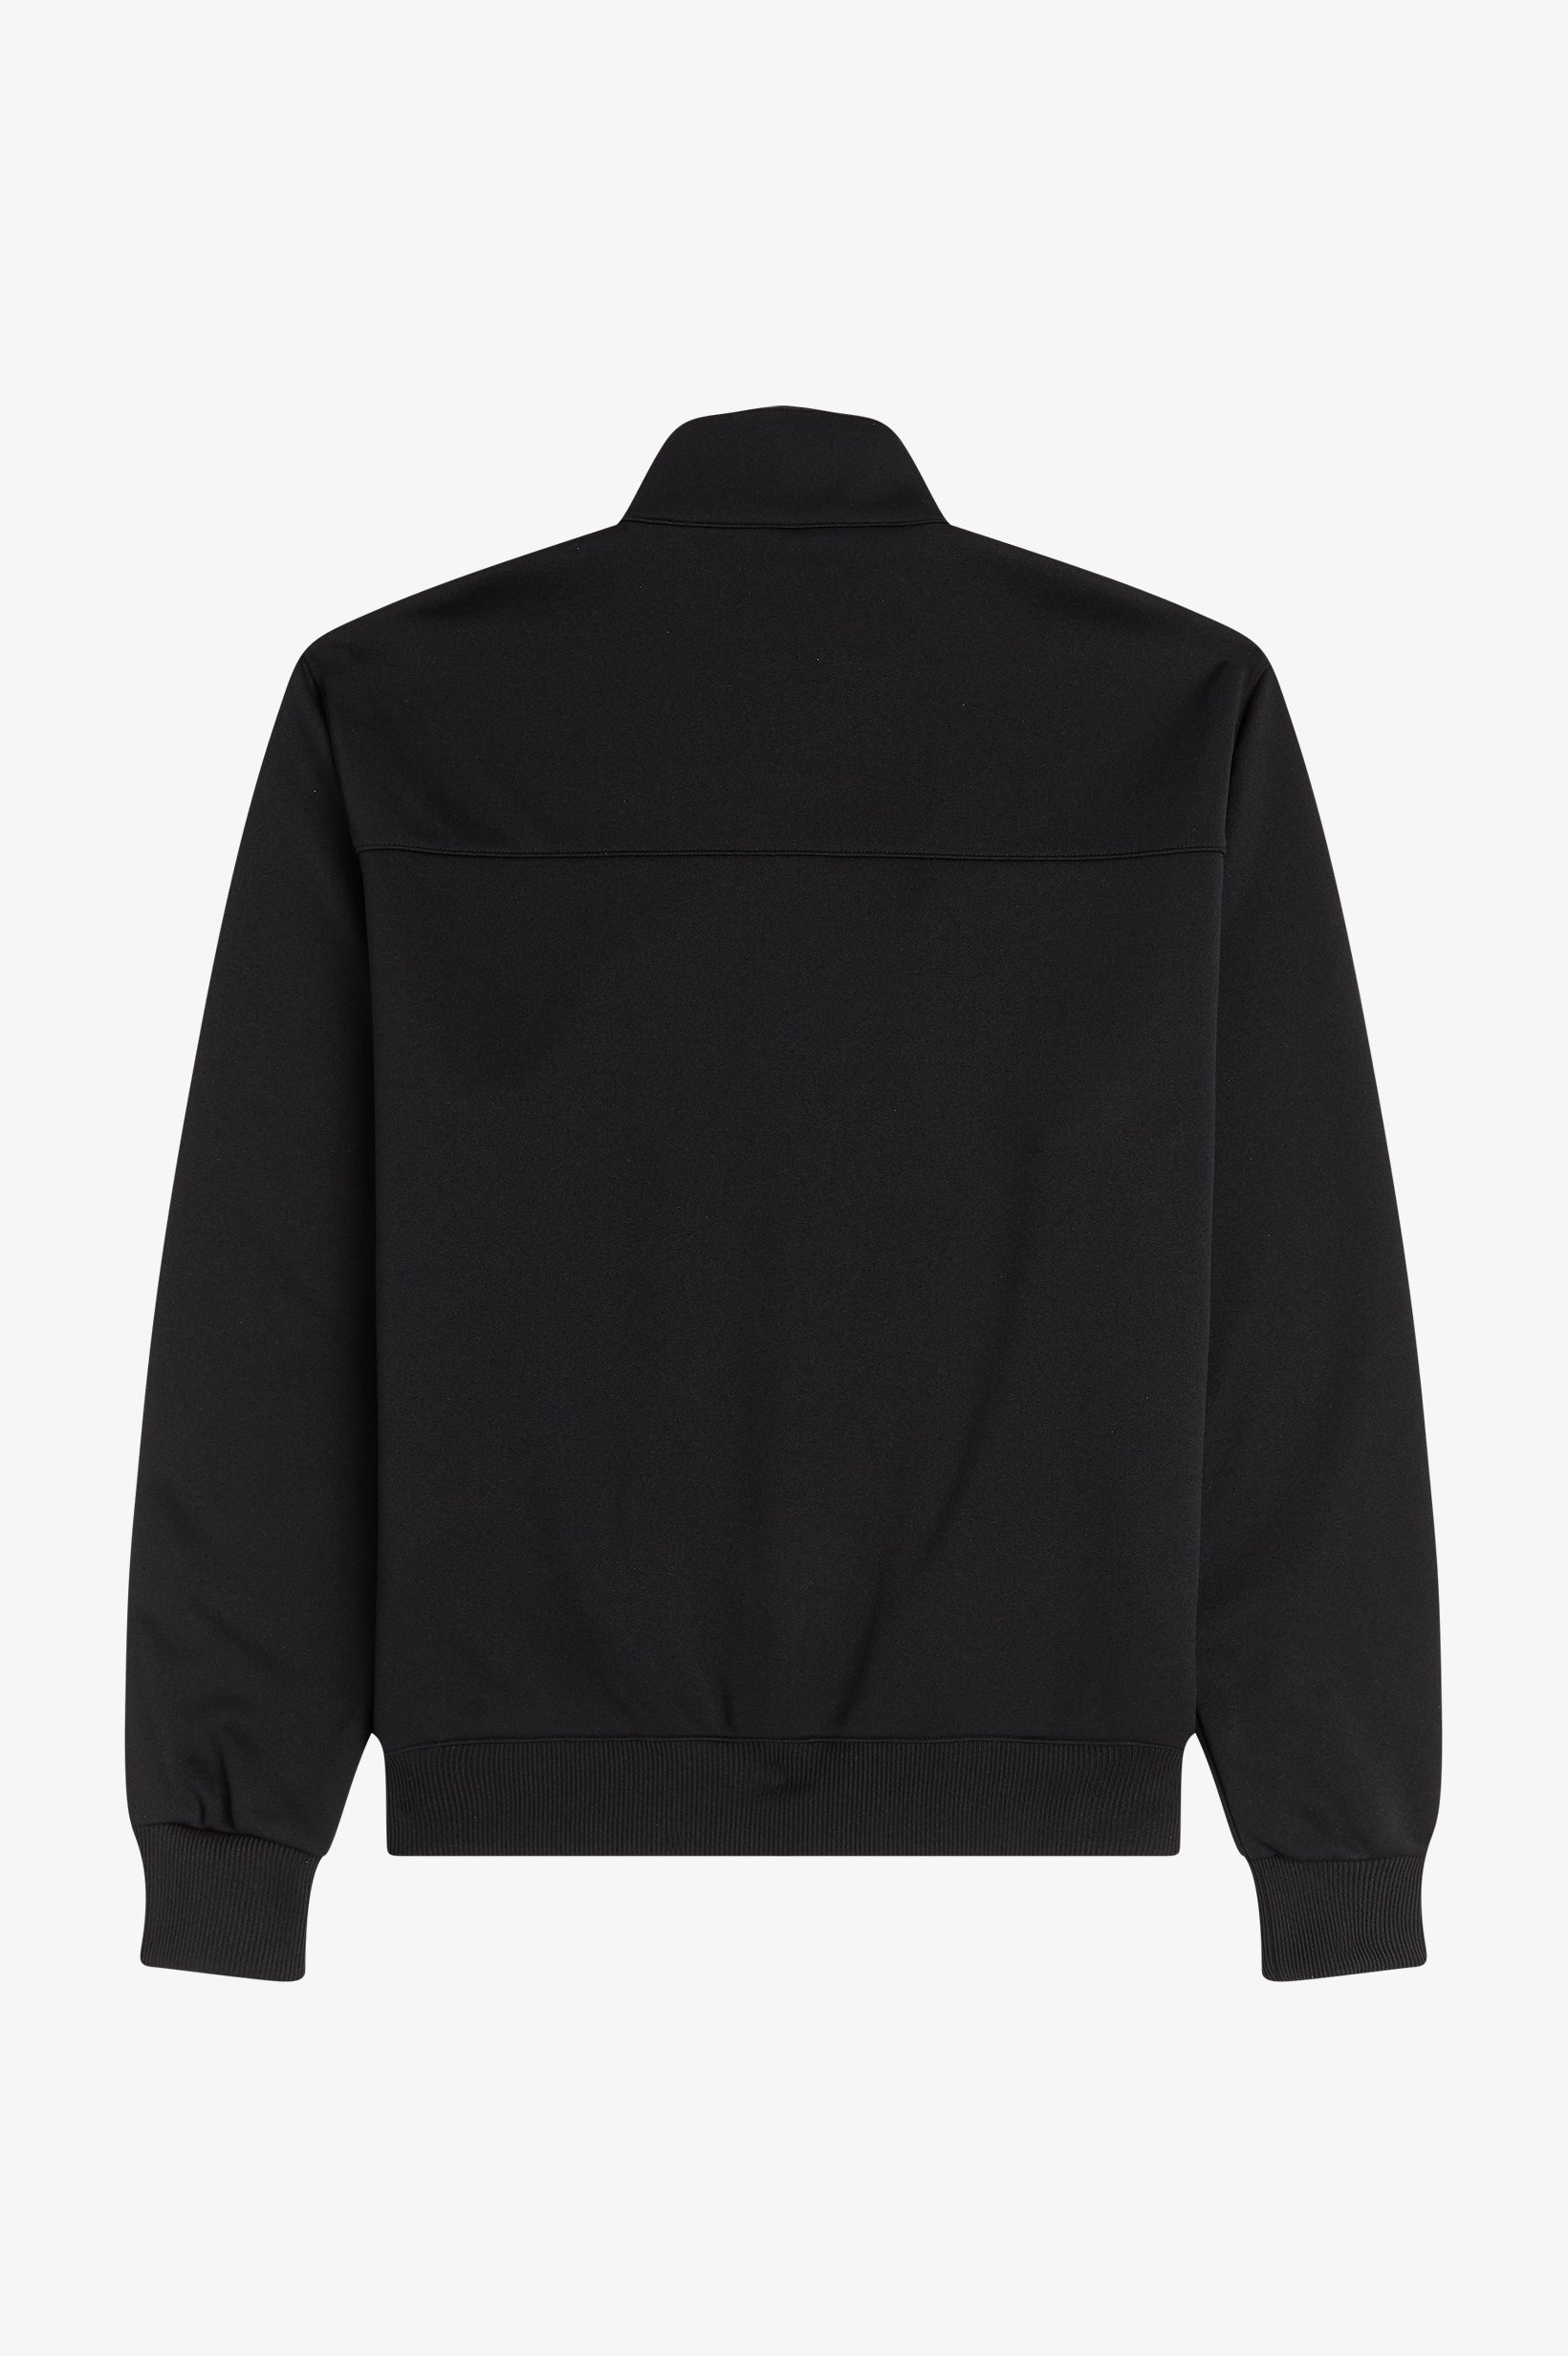 STAND COLLAR NECK TRACK JACKET